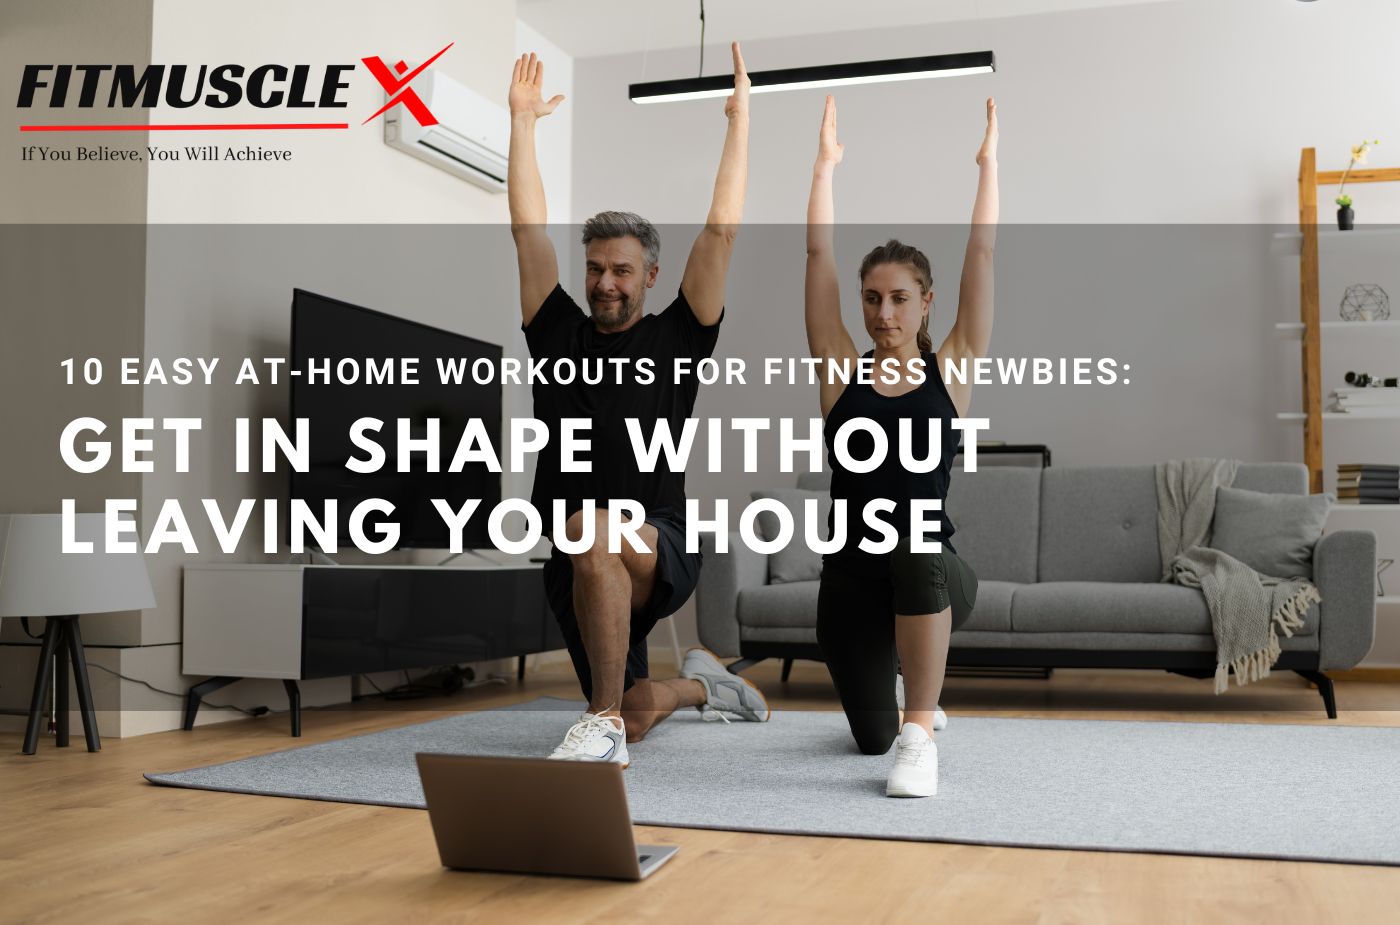 Workouts for Fitness Get in Shape Without Leaving Your Hous - Uttar Pradesh - Noida ID1559347